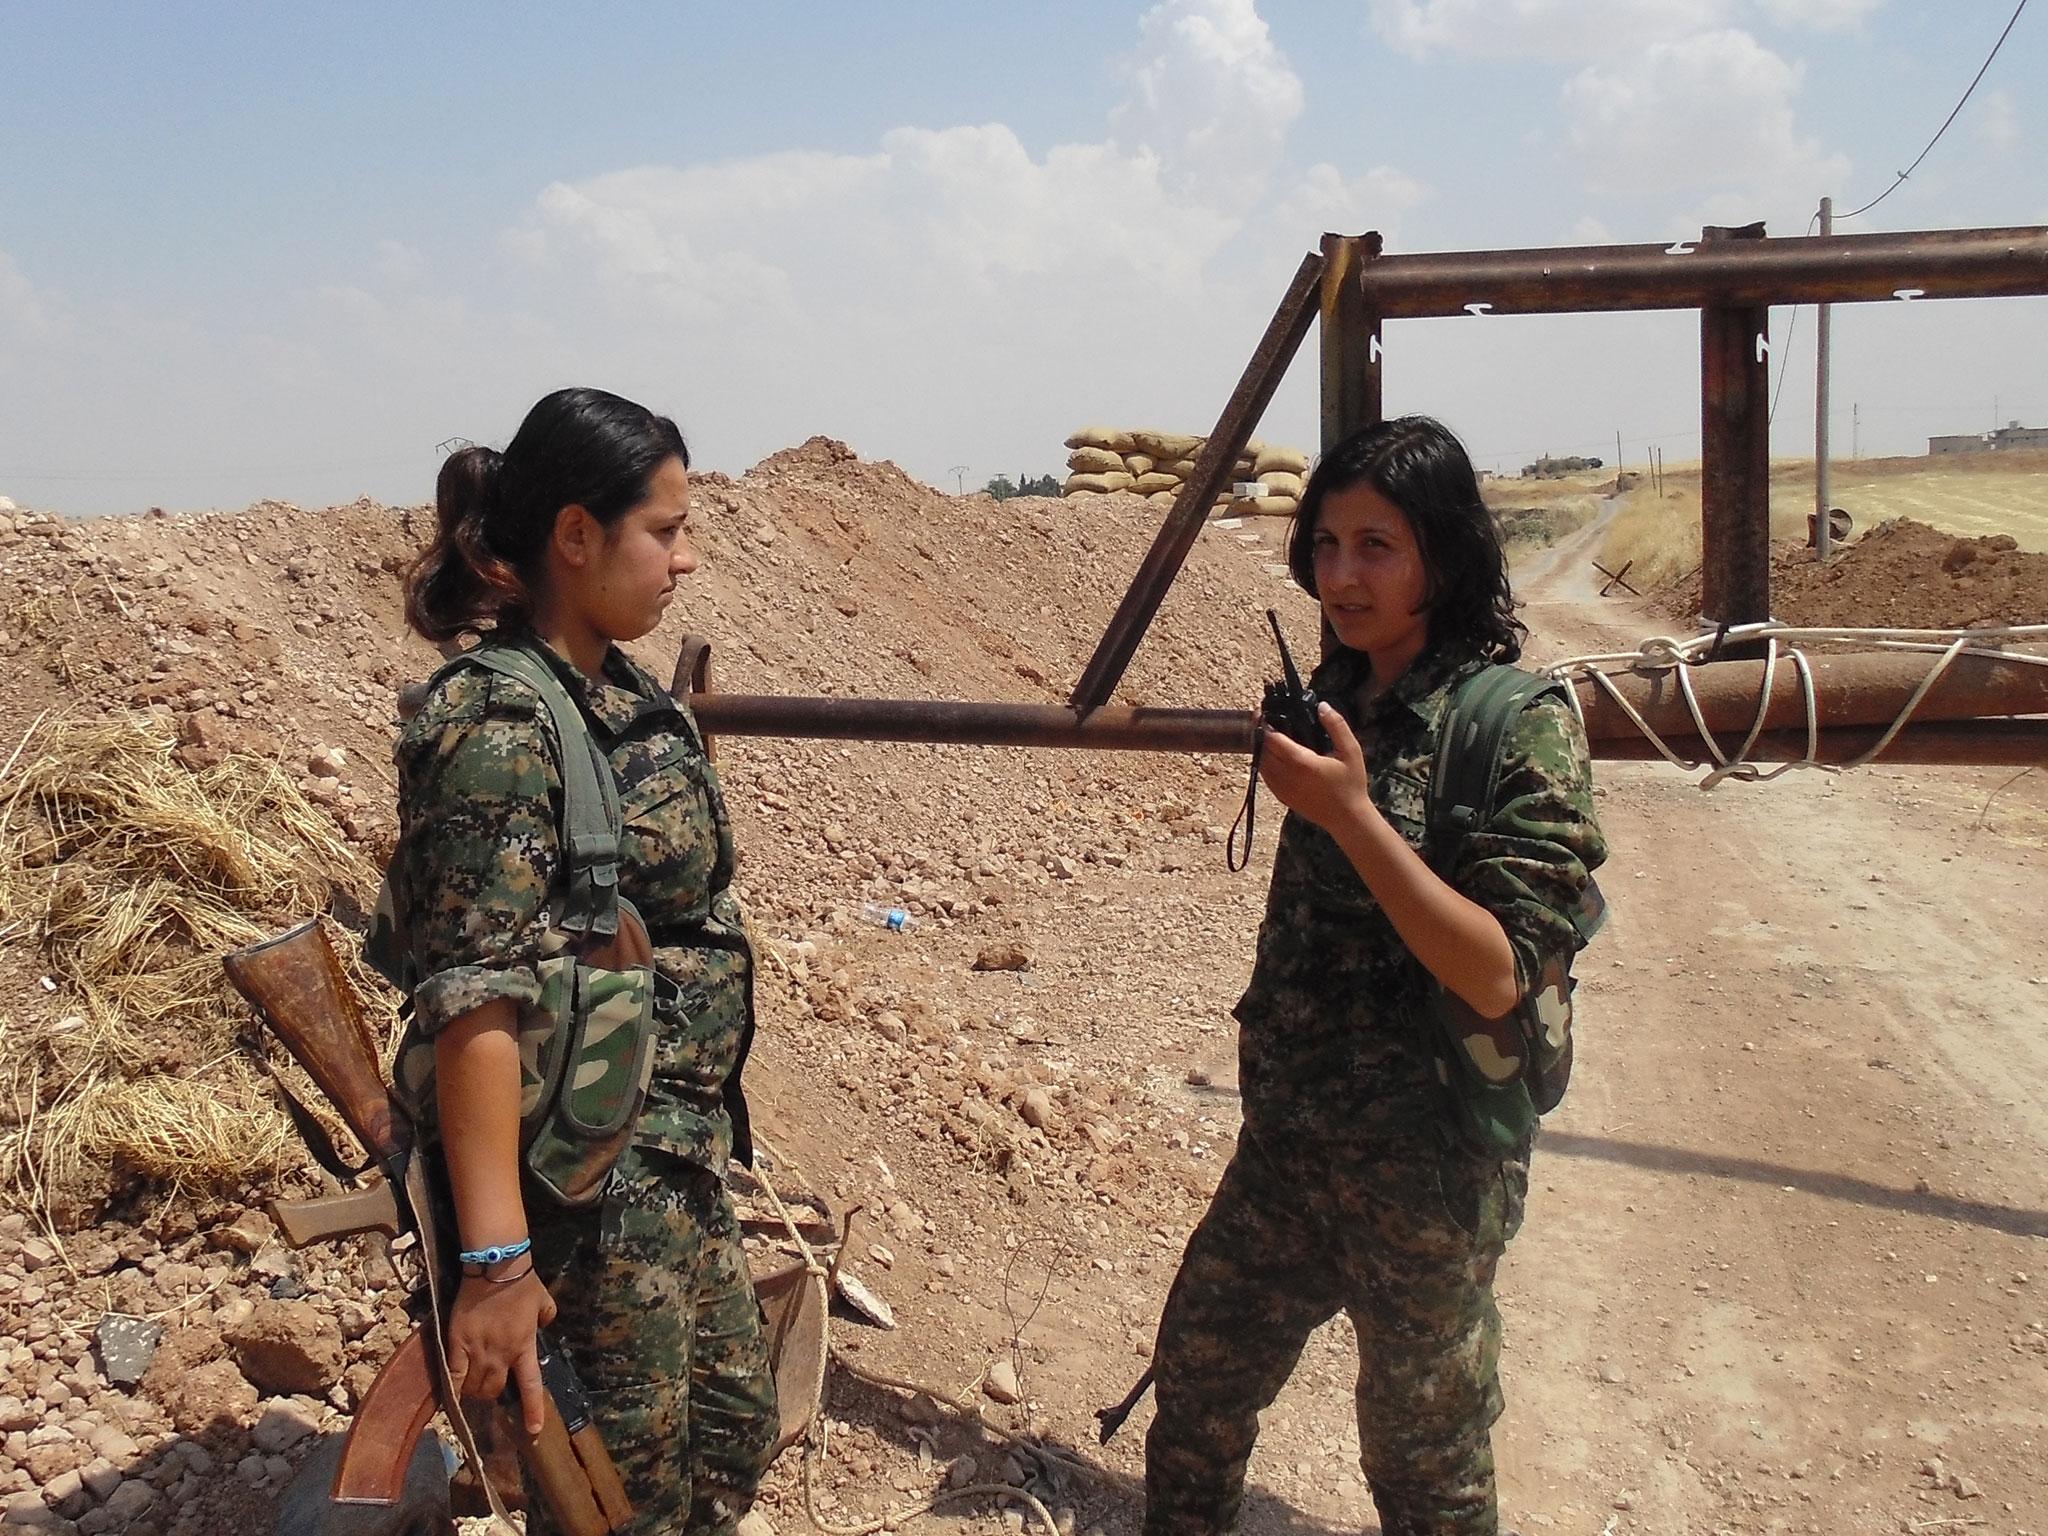 Female fighters of the YPJ (women’s defence units) in Rojava, a Kurdish controlled area of Syria